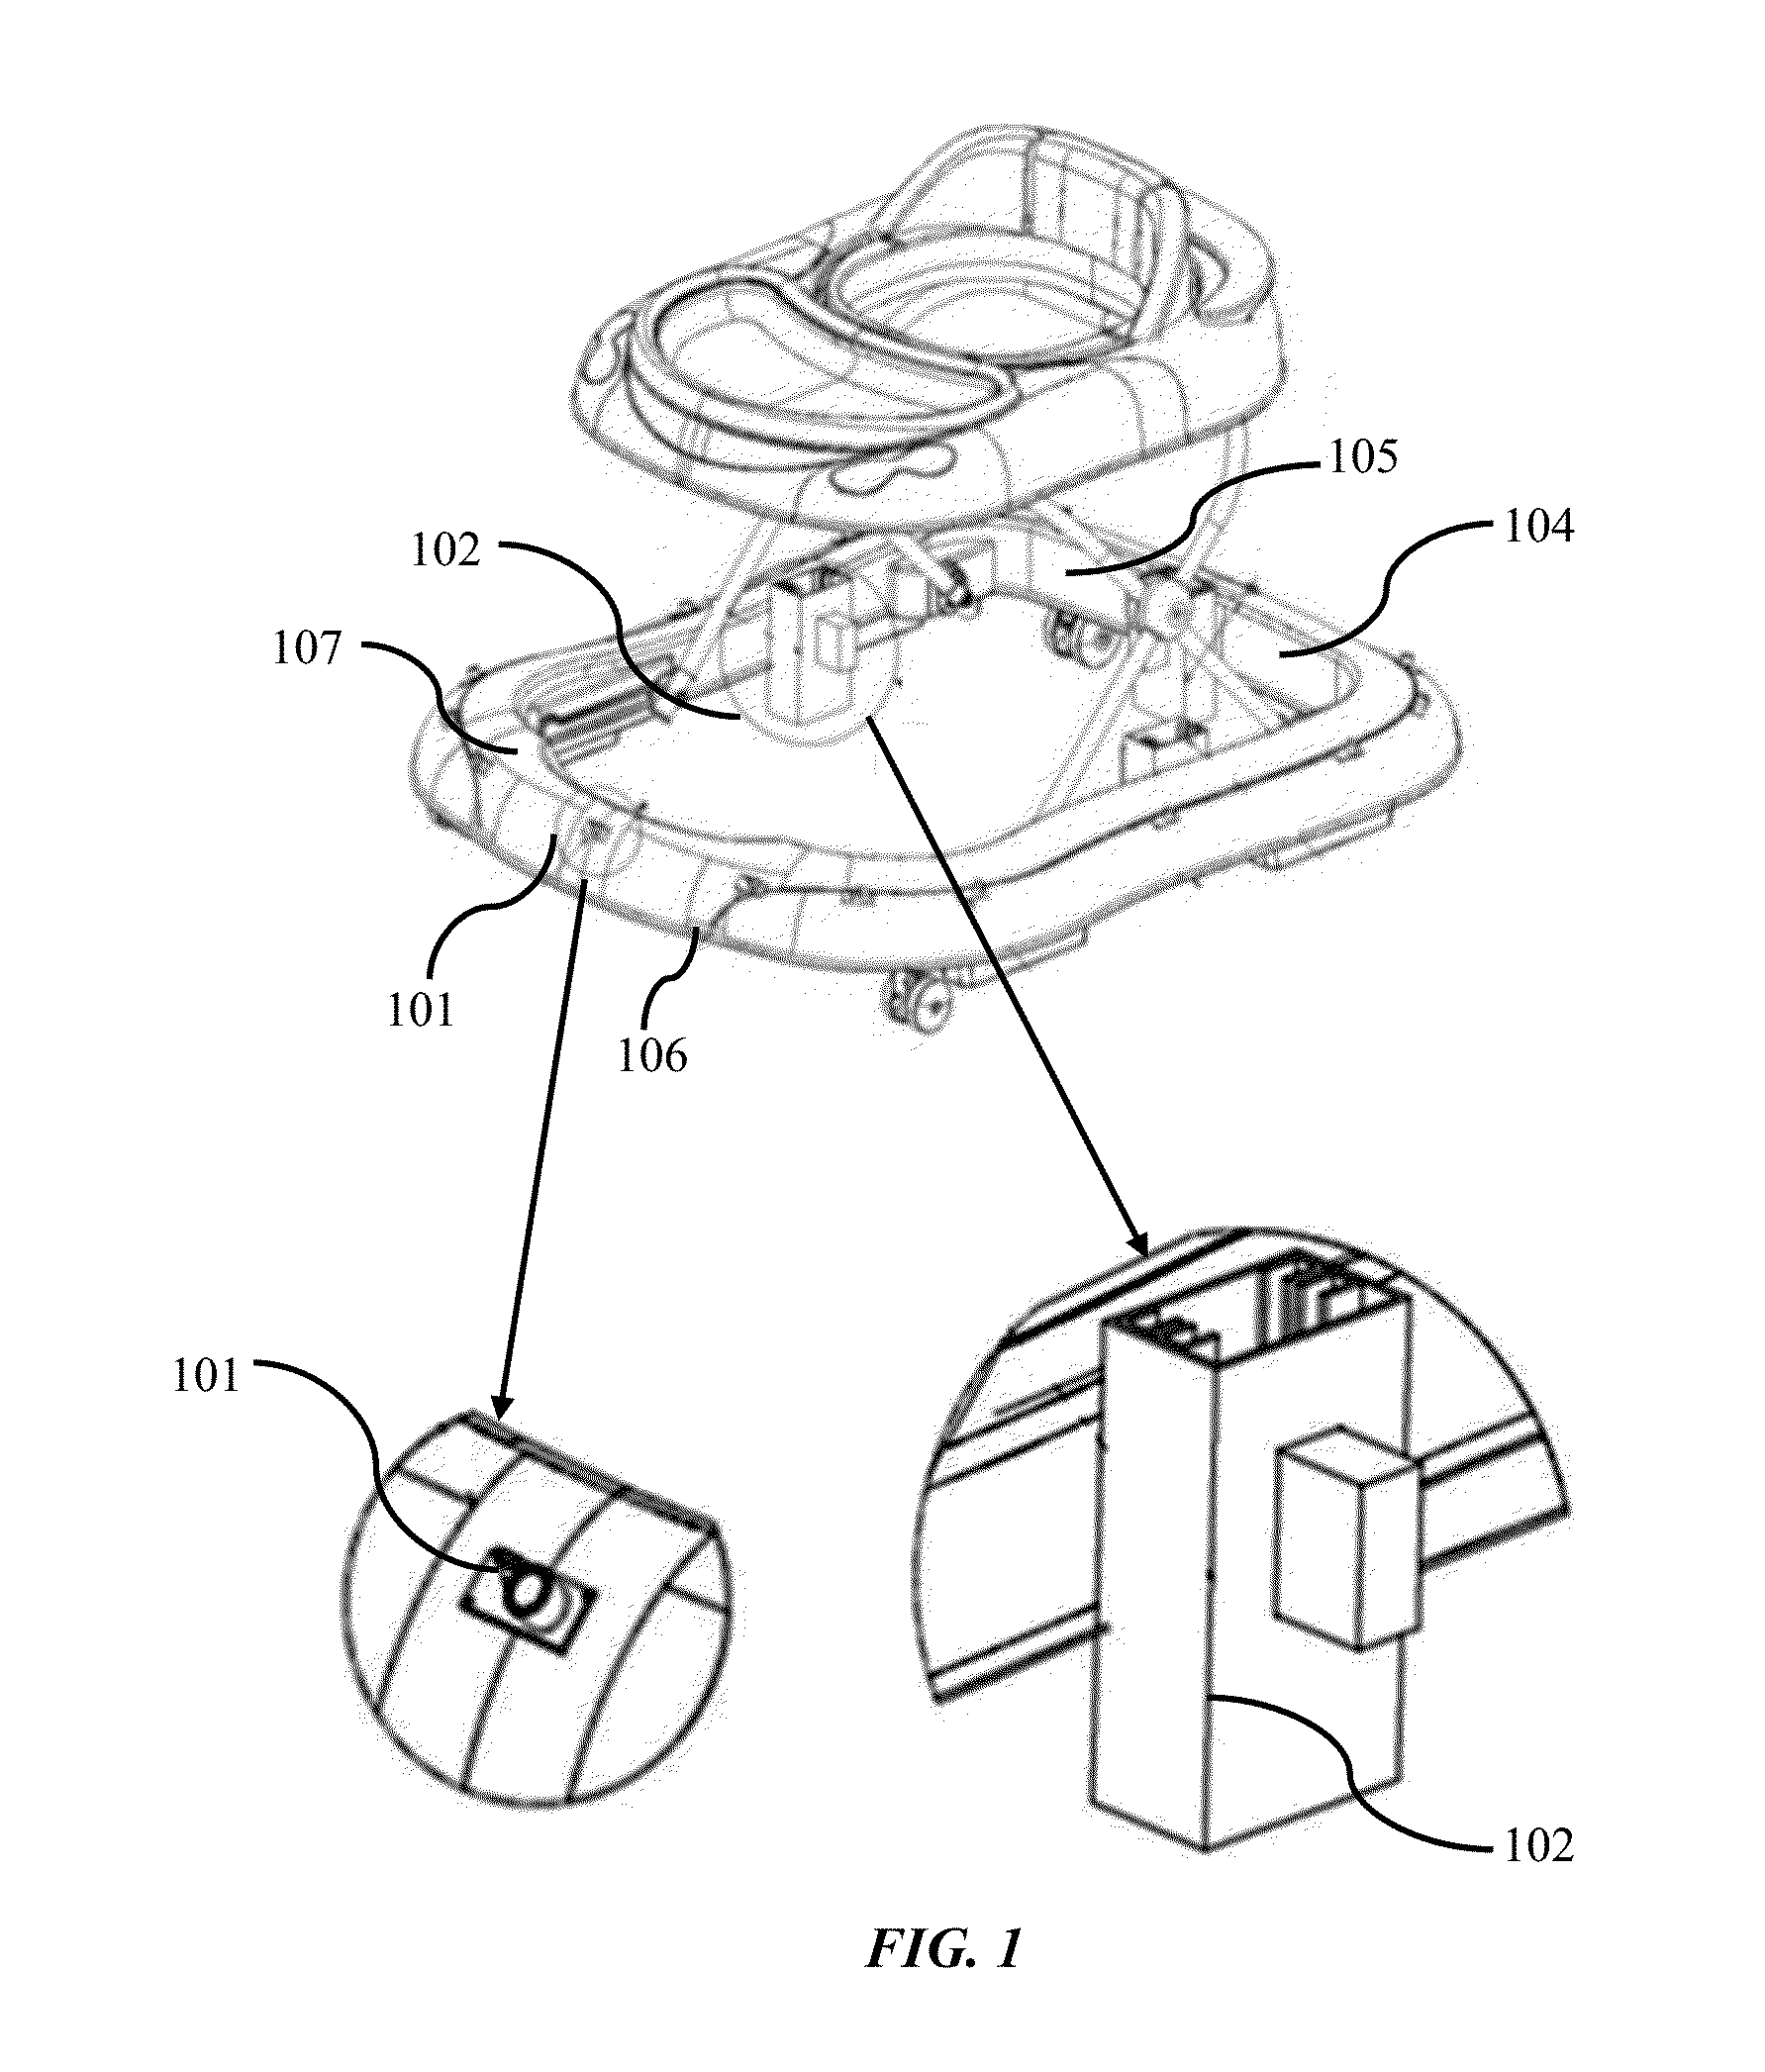 Baby walker system with a braking mechanism for movement control